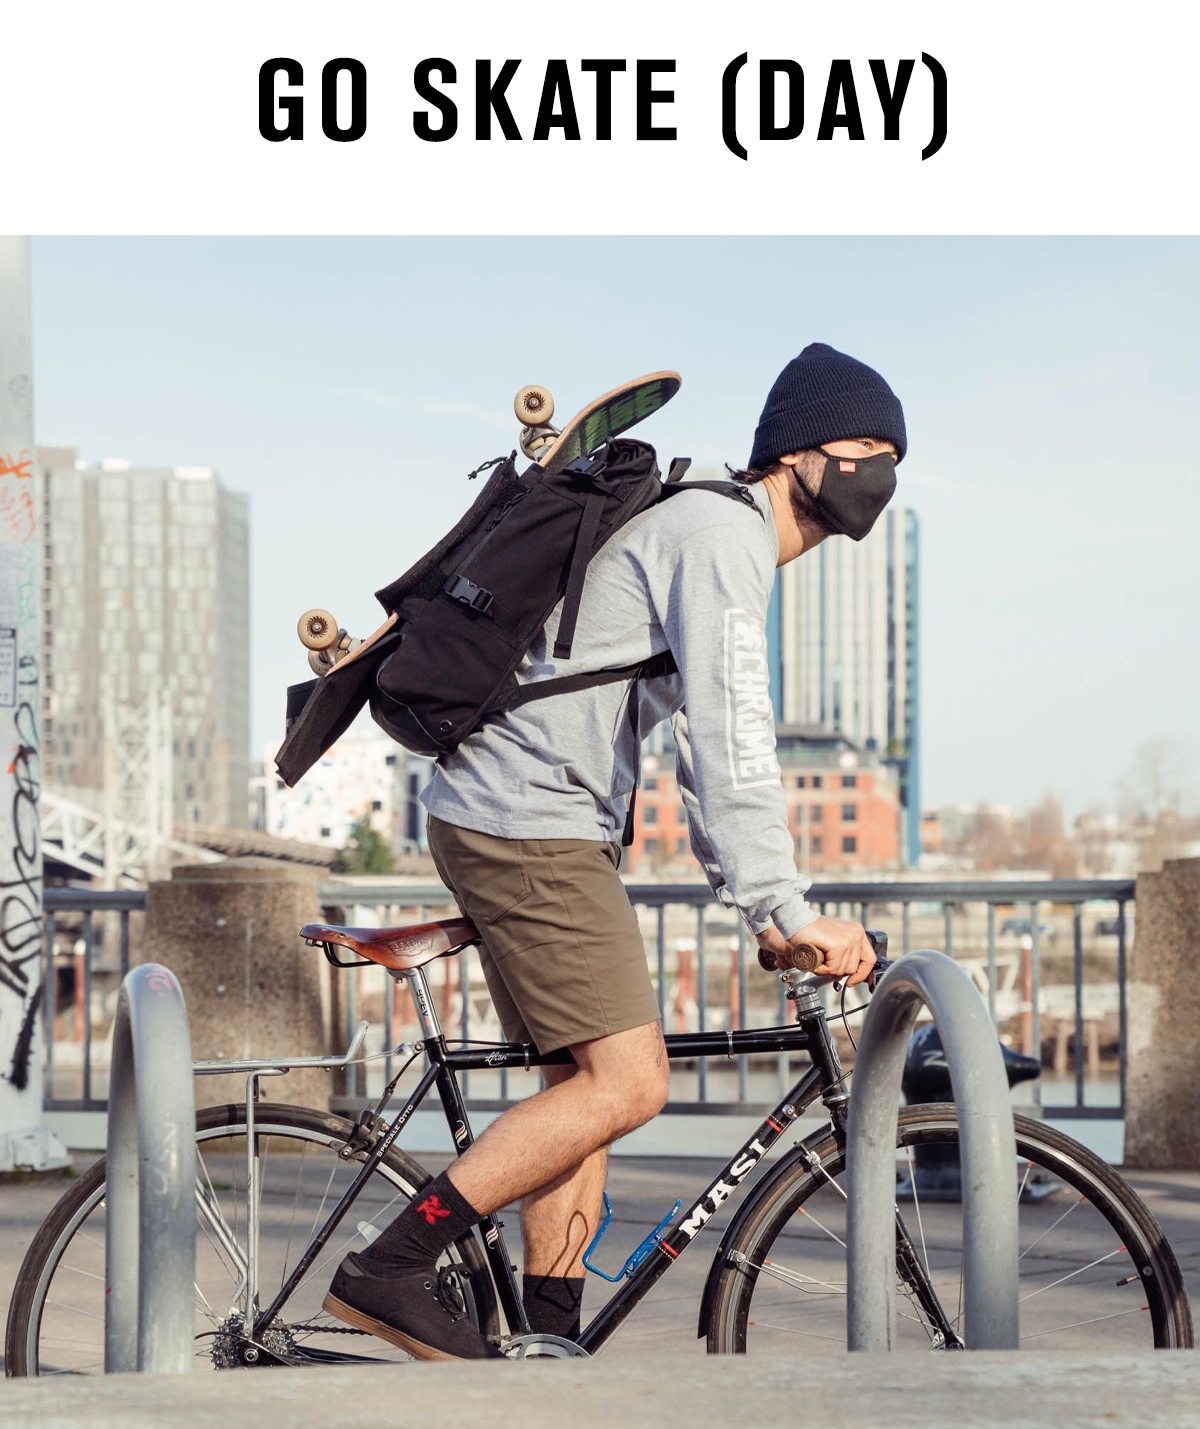 Go Skate (Day). From Two Wheels to Four. - Chrome Industries Email ...